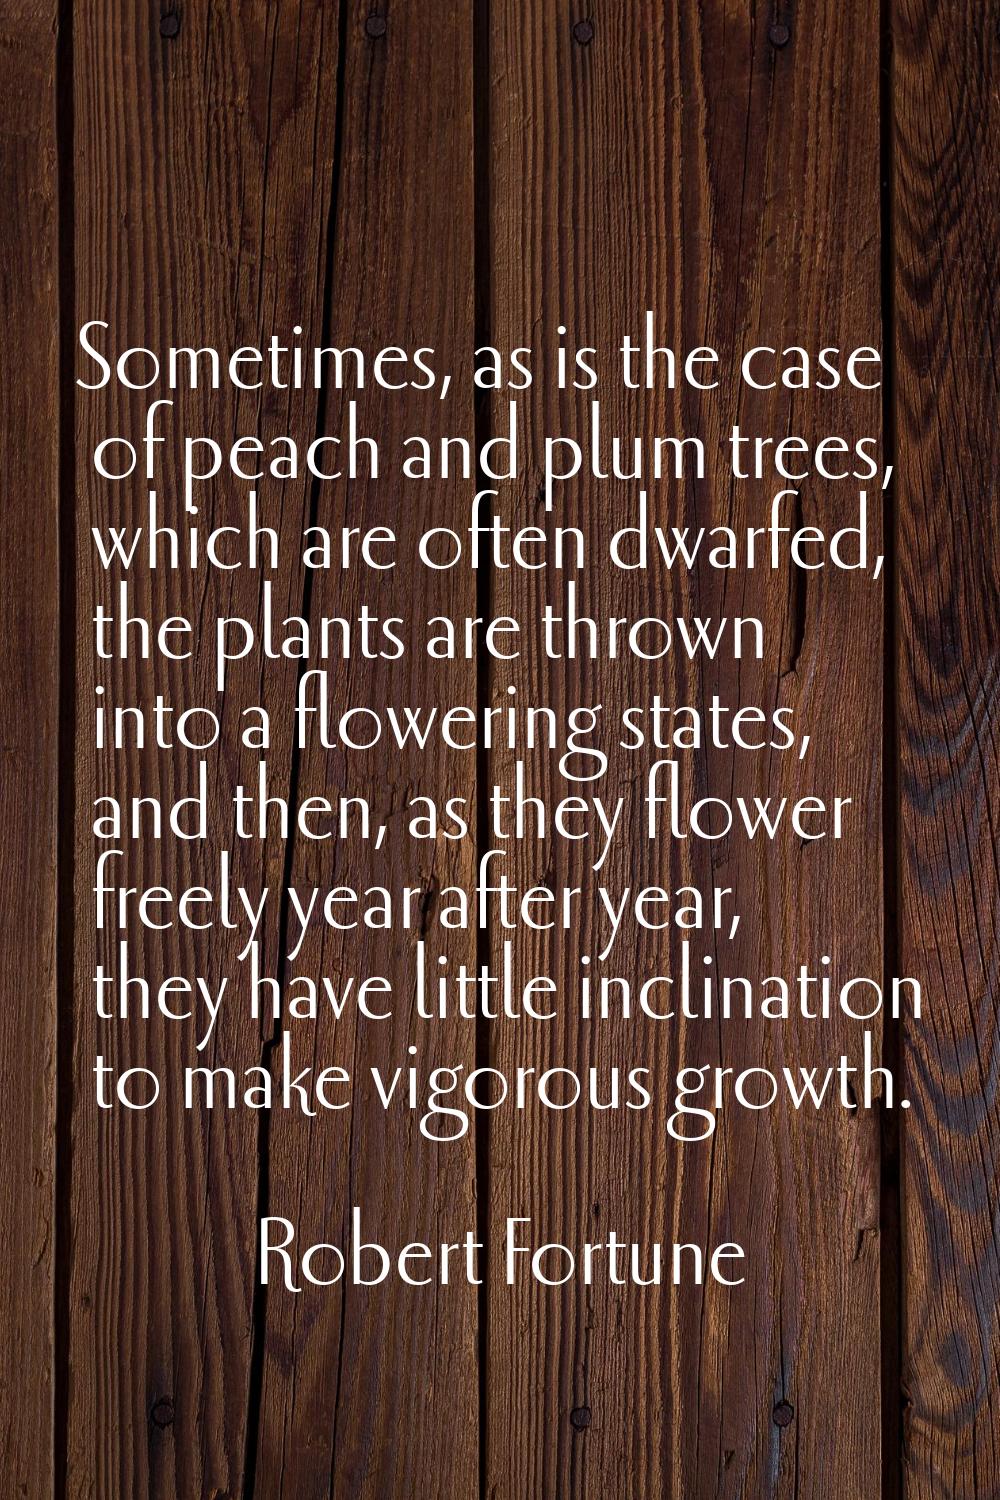 Sometimes, as is the case of peach and plum trees, which are often dwarfed, the plants are thrown i